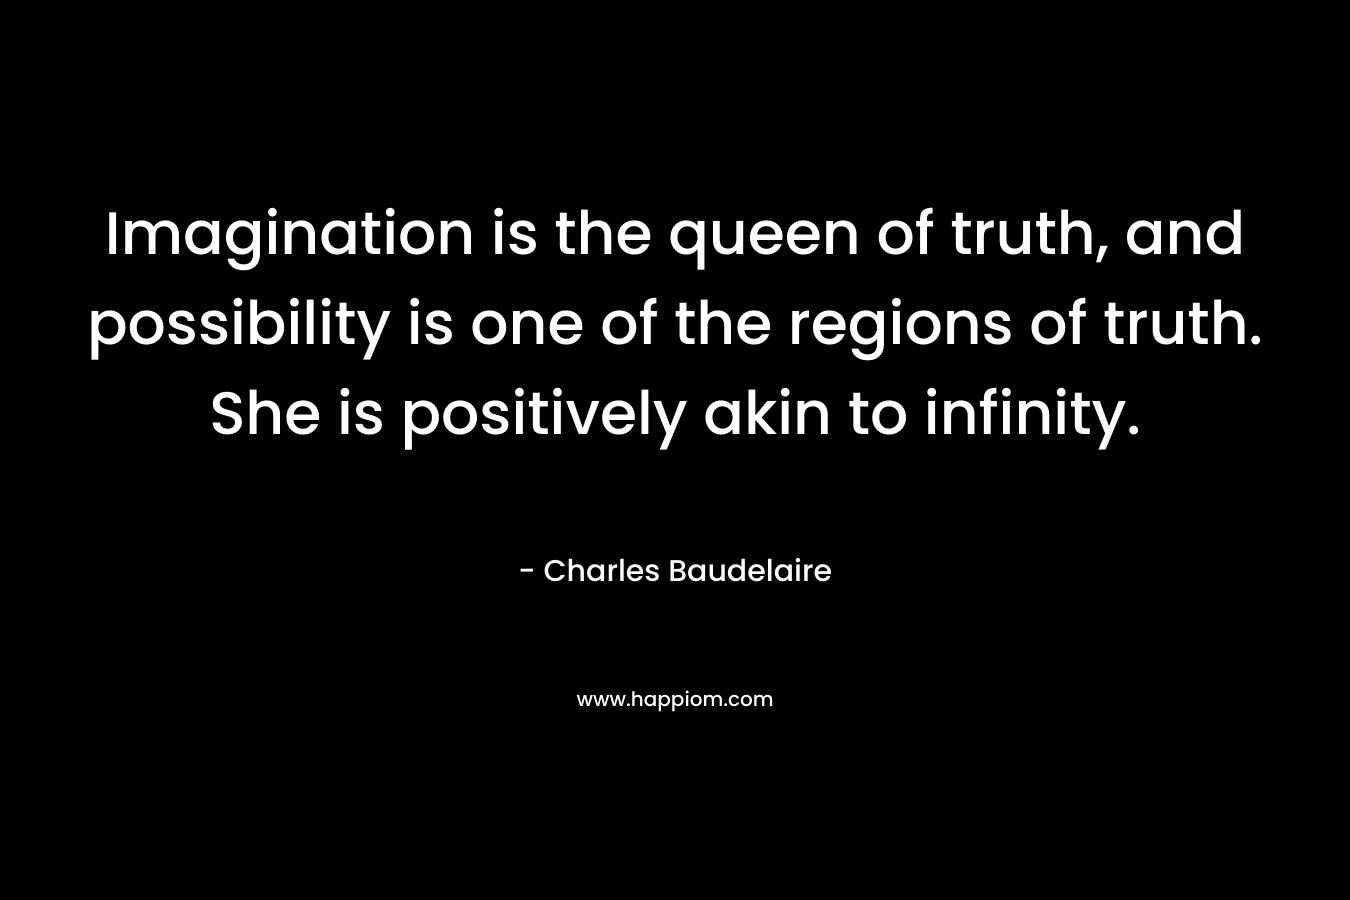 Imagination is the queen of truth, and possibility is one of the regions of truth. She is positively akin to infinity. – Charles Baudelaire